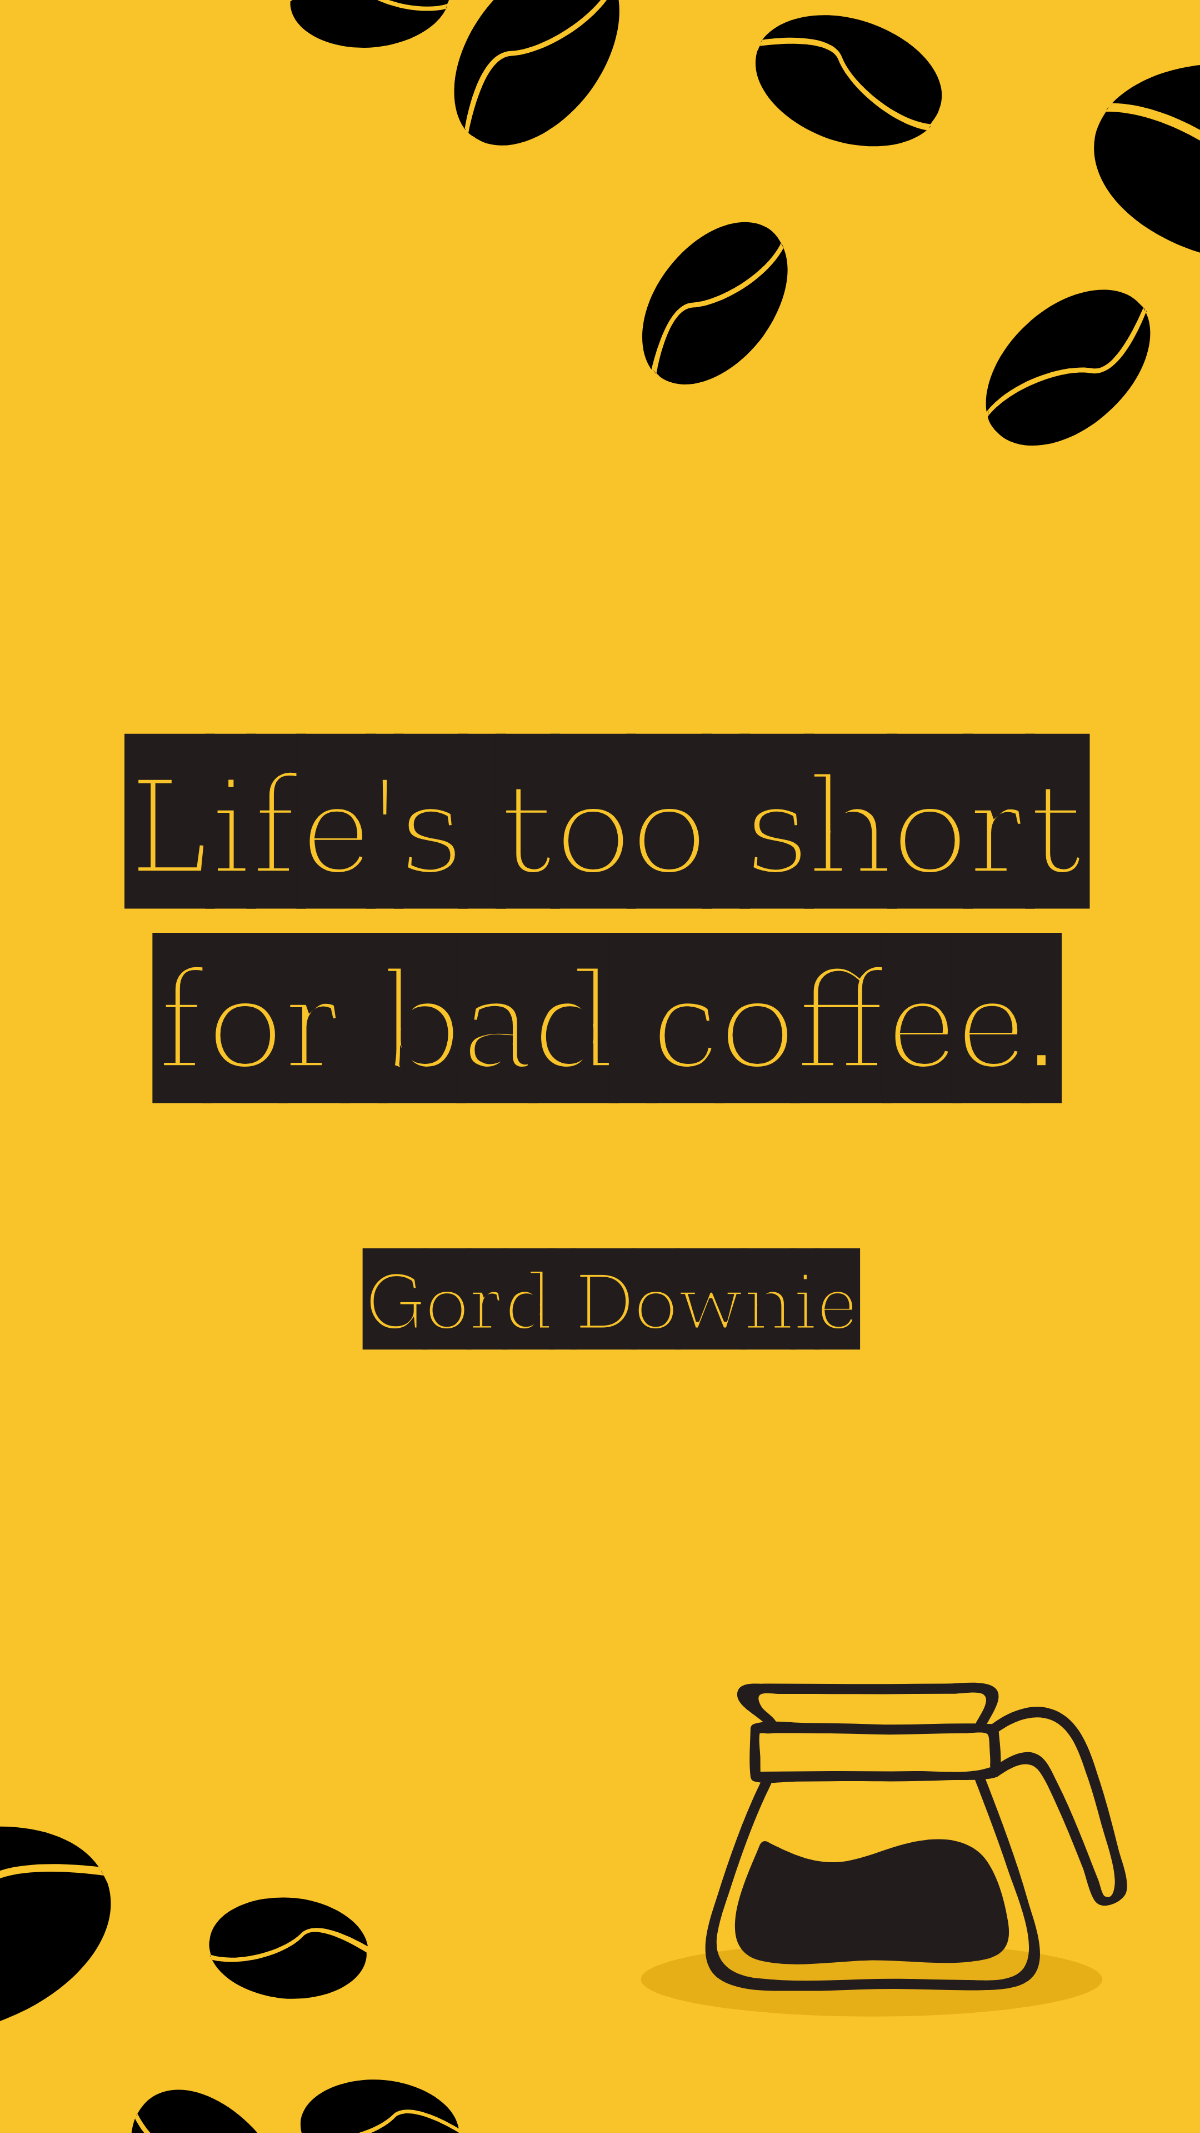 Free Gord Downie - Life's too short for bad coffee. Template